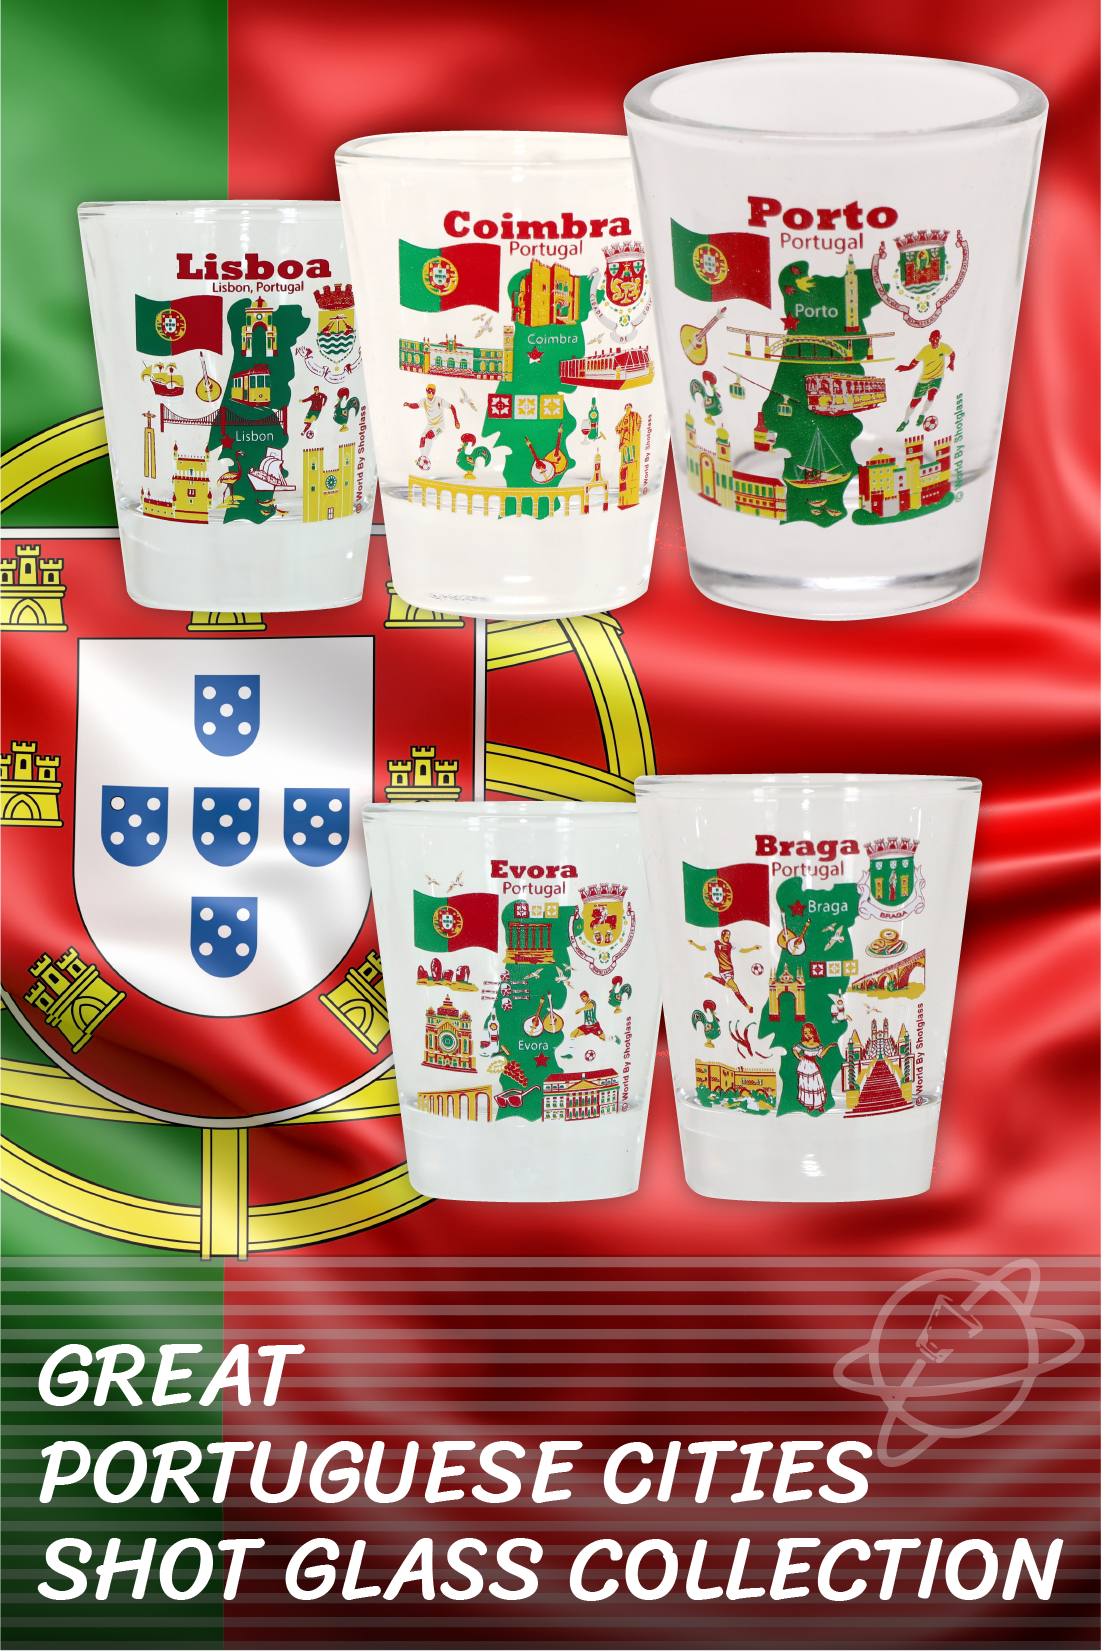 Great Portuguese Cities Shot Glass Collection